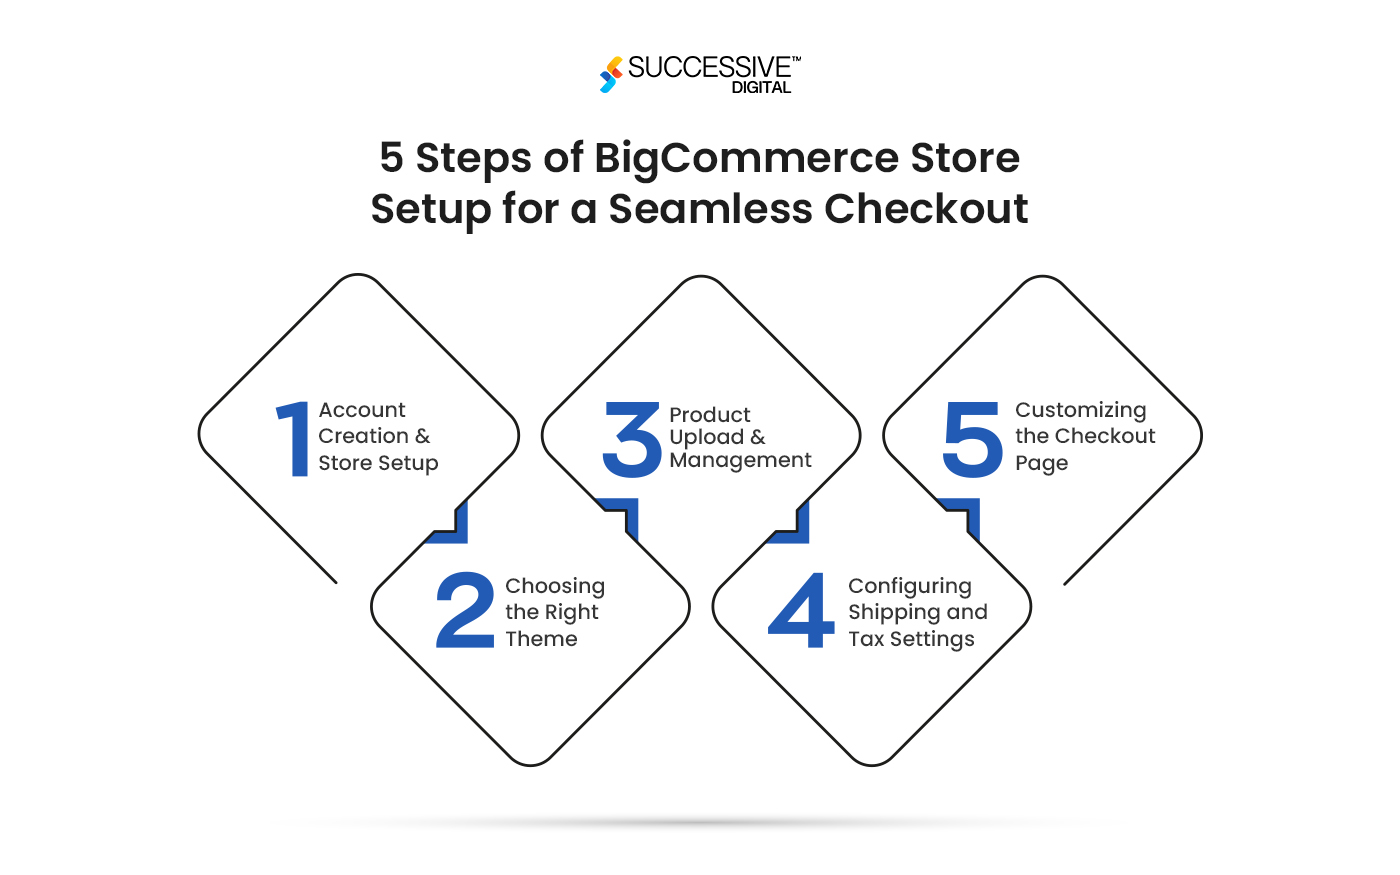 Step-by-Step Guide to Setting up Your BigCommerce Store for a Seamless Checkout